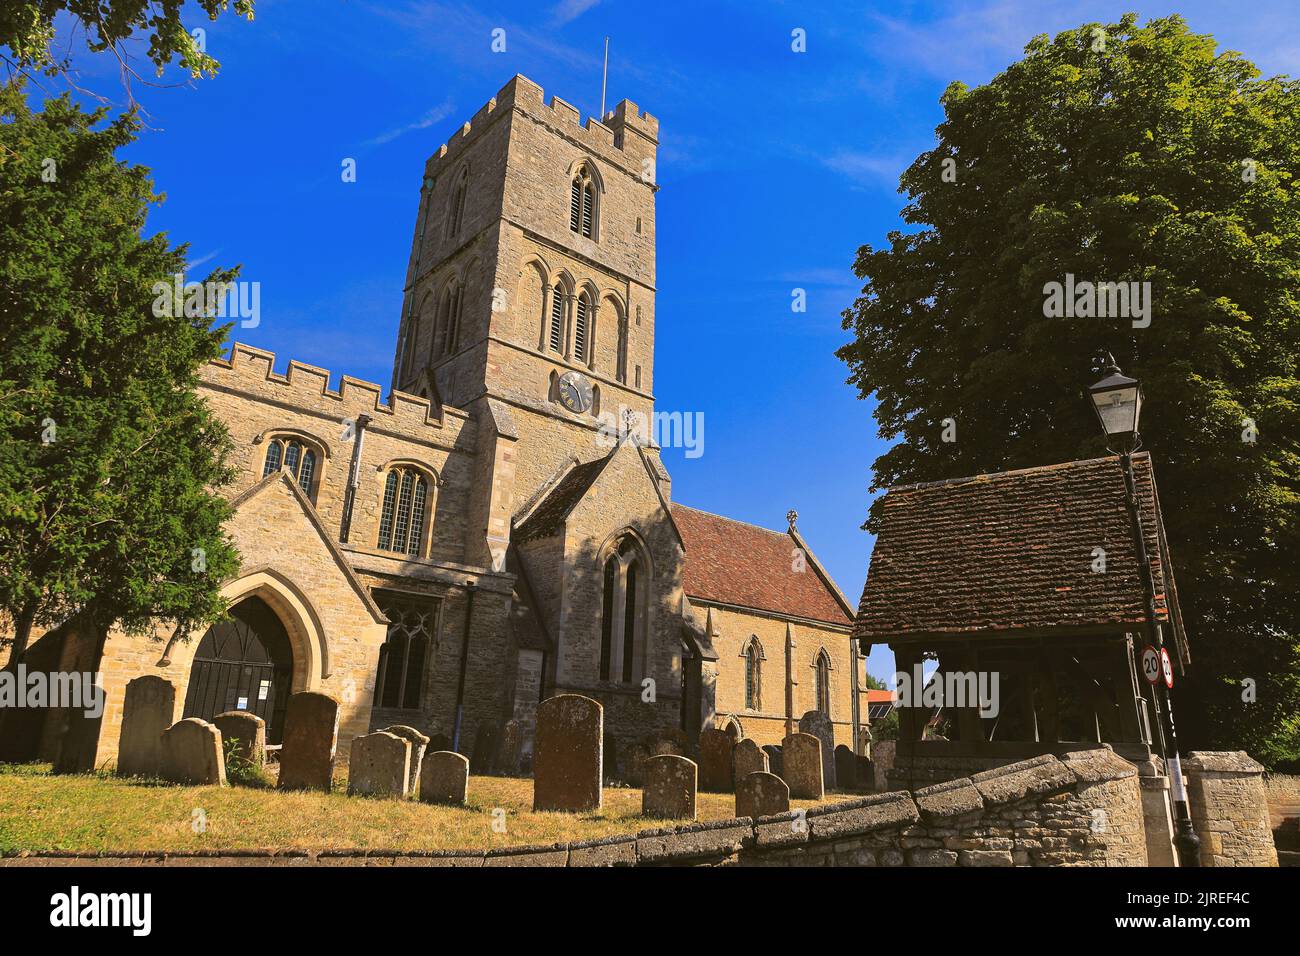 Felmersham, Bedfordshire, UK - St Mary's church with its pretty lychgate and churchyard on a sunny day in summer Stock Photo